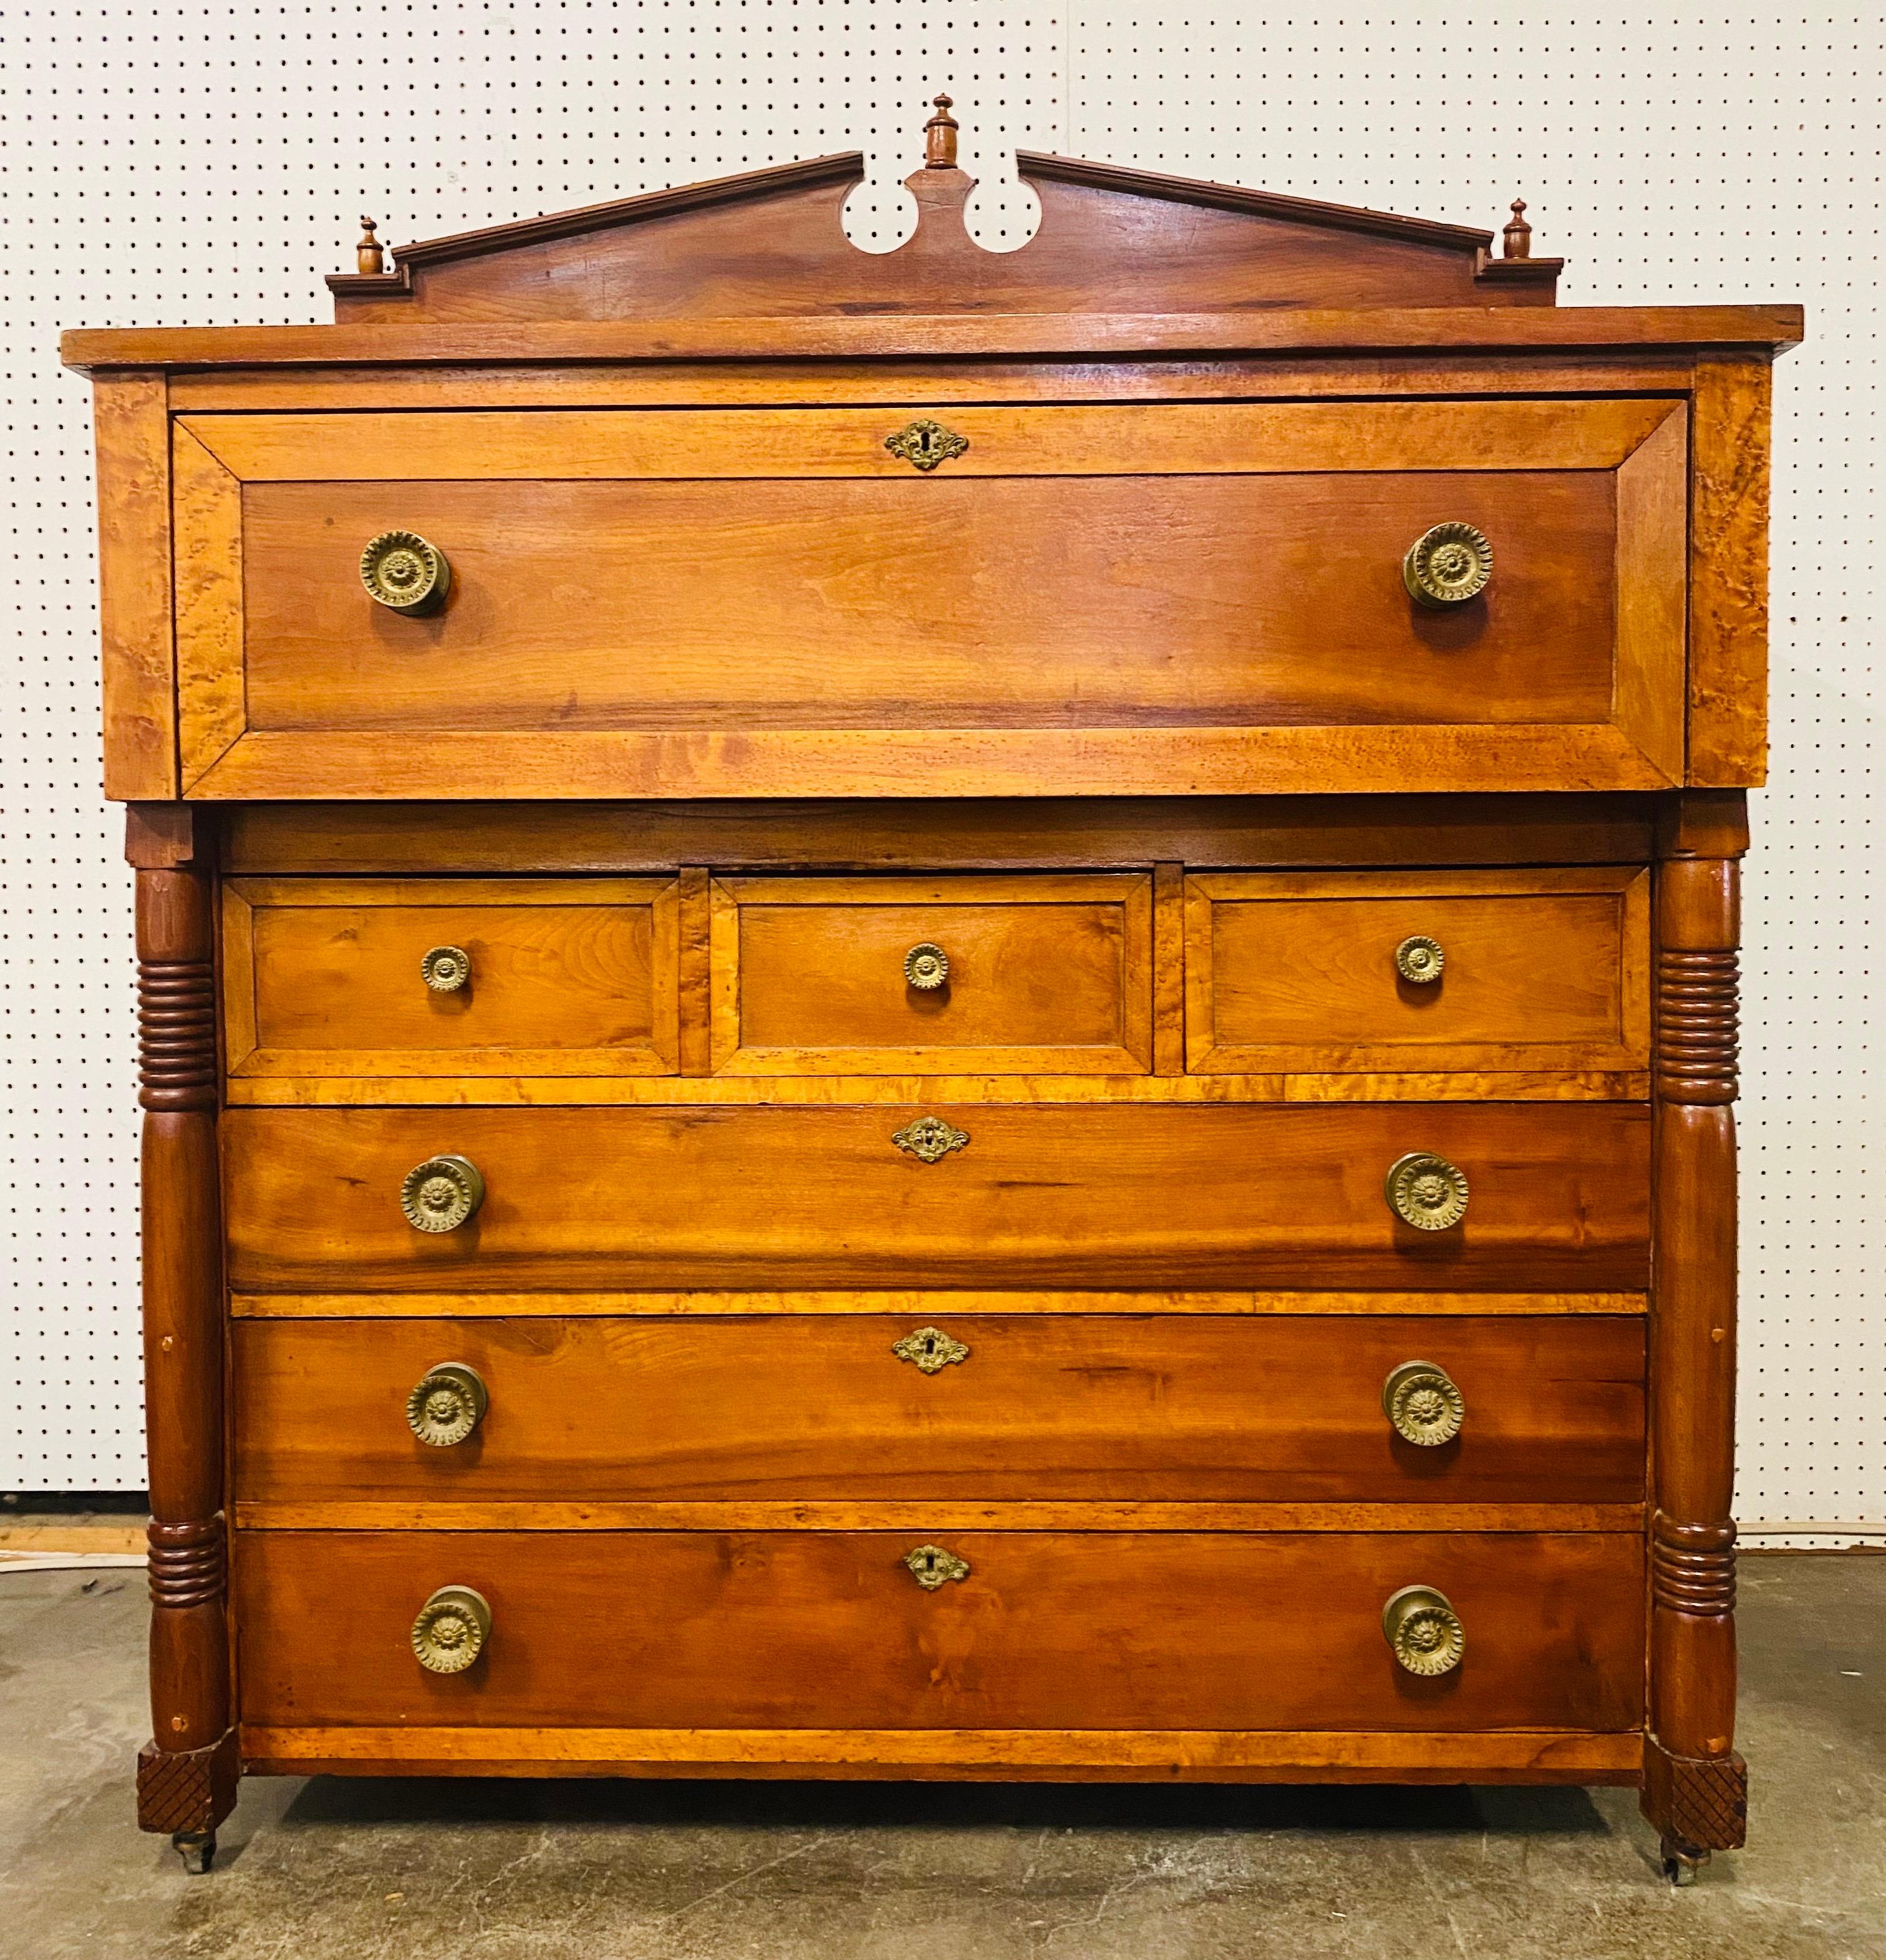 Handsome 19th century American Empire handcrafted Chester drawers For Sale 6